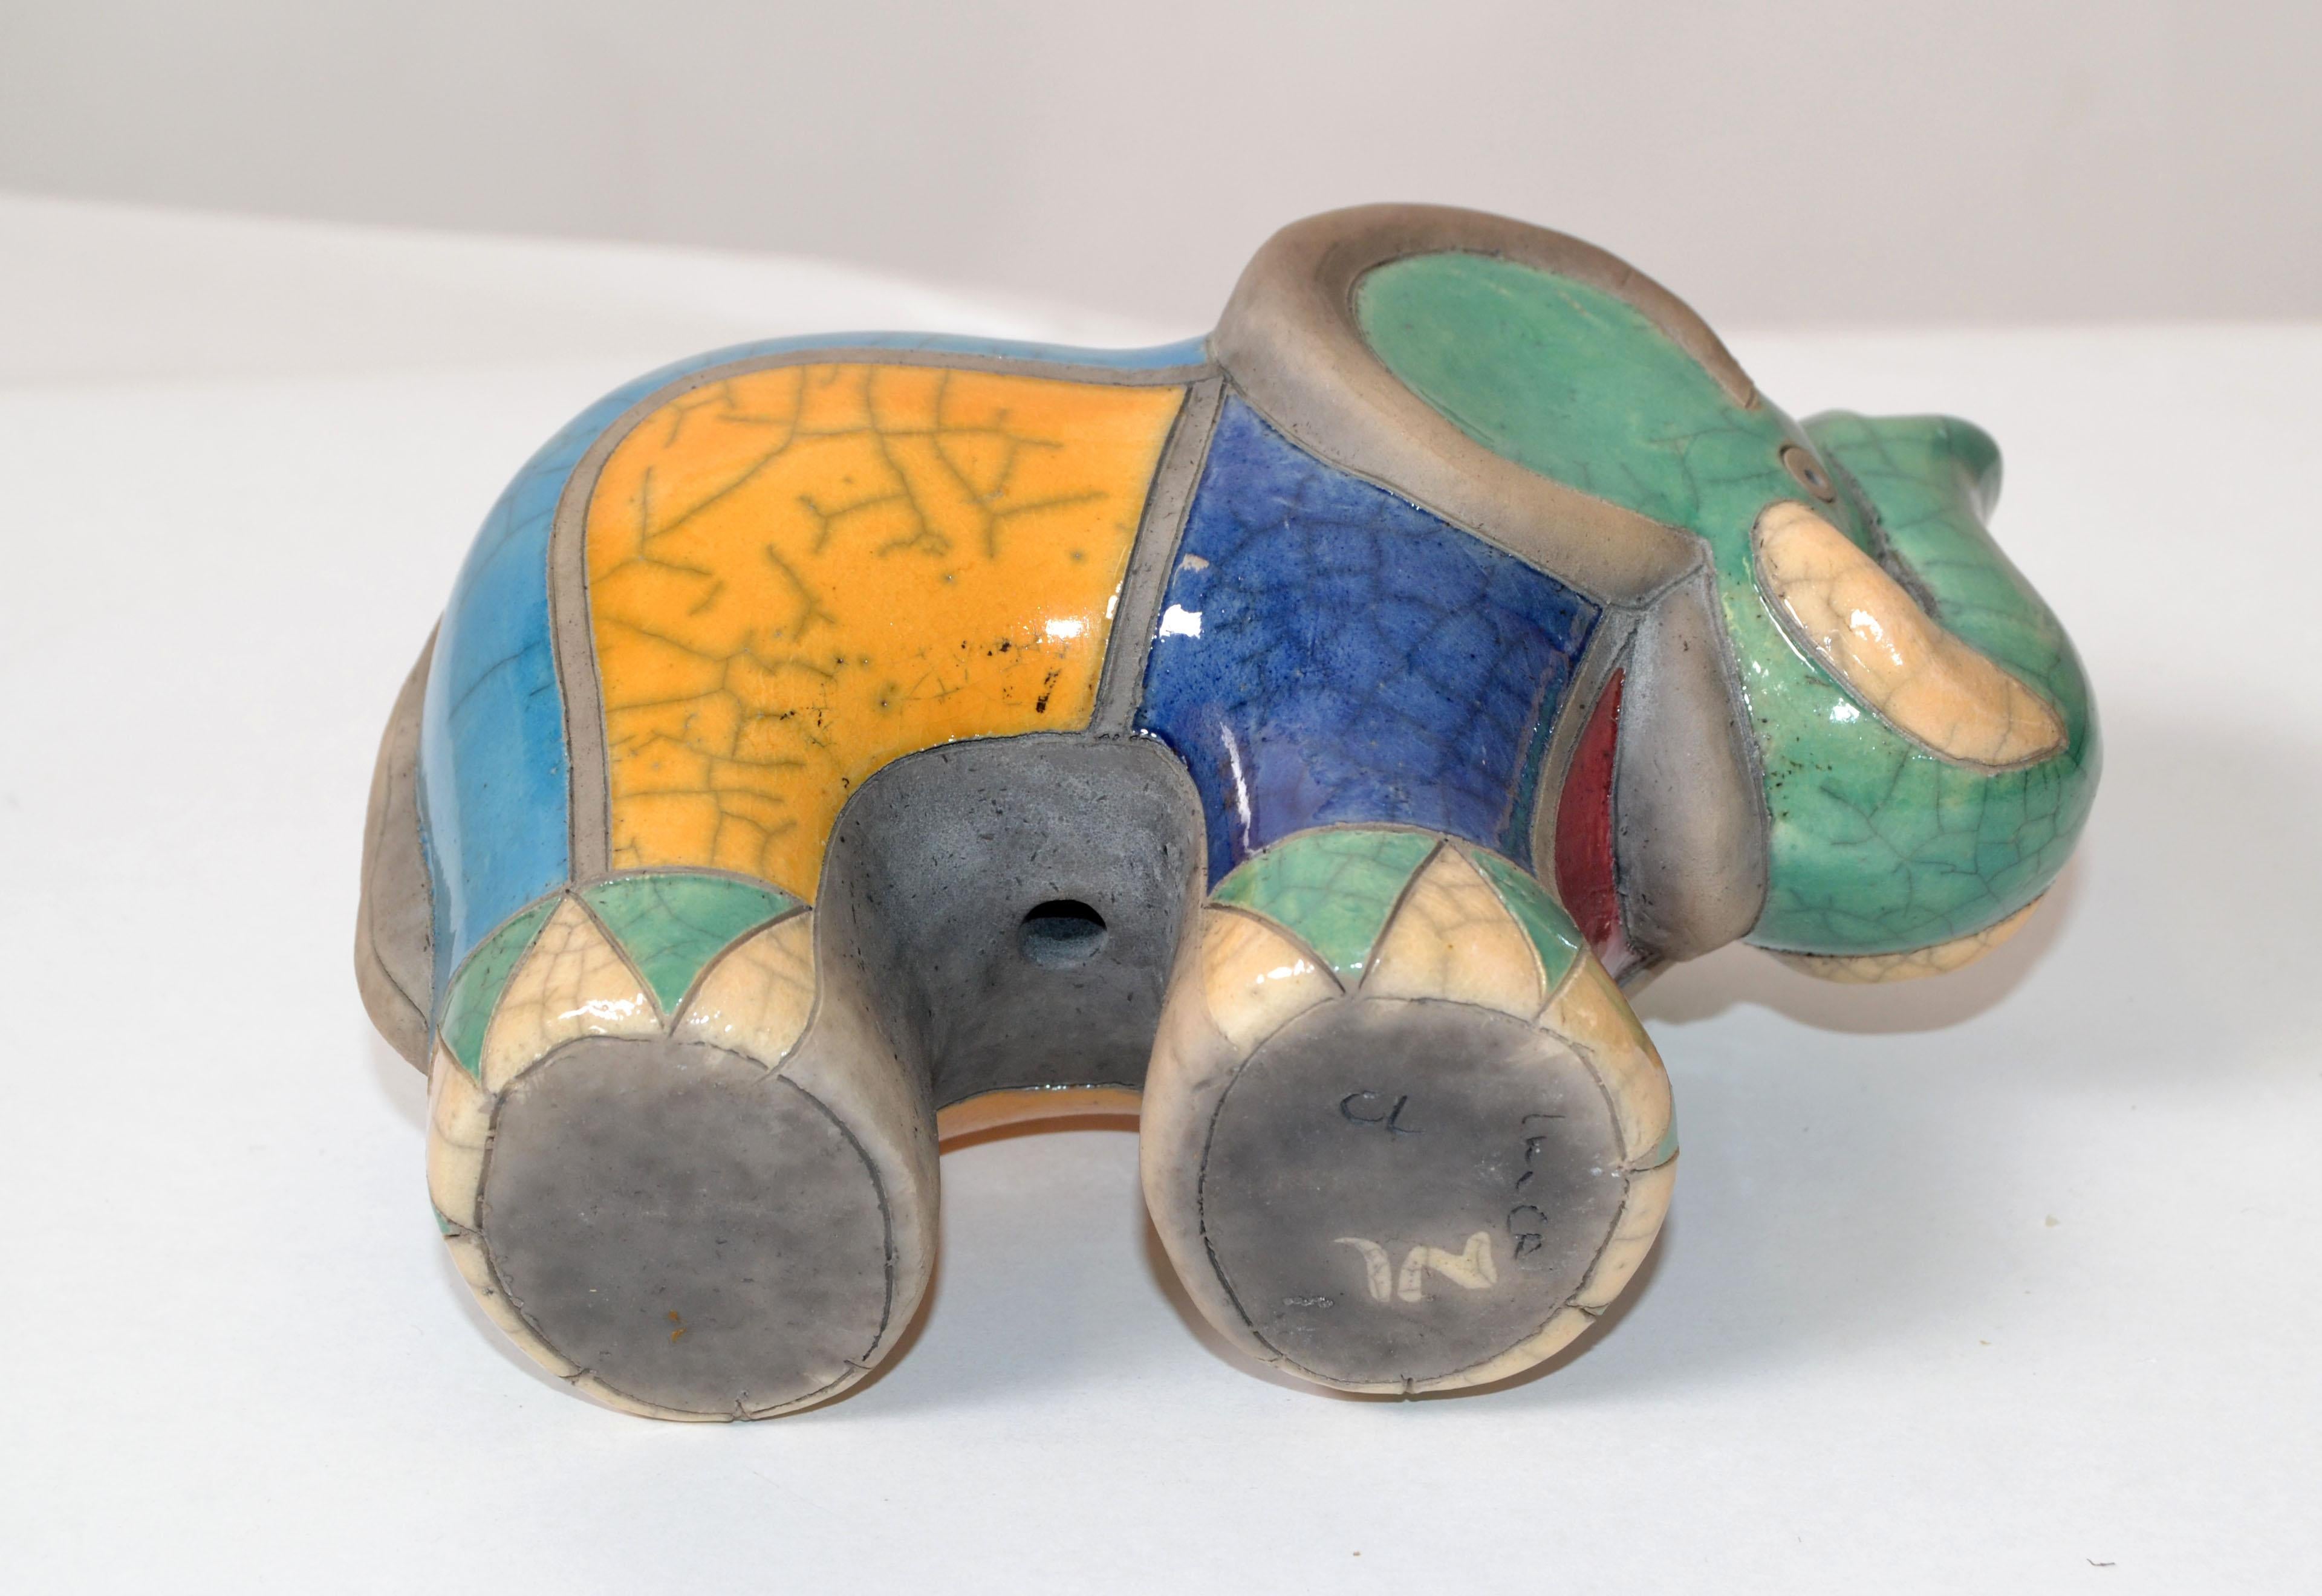 Luca CL Marked Colorful Ceramic Elephant Sculpture Mid-Century Modern Italy 1970 For Sale 4